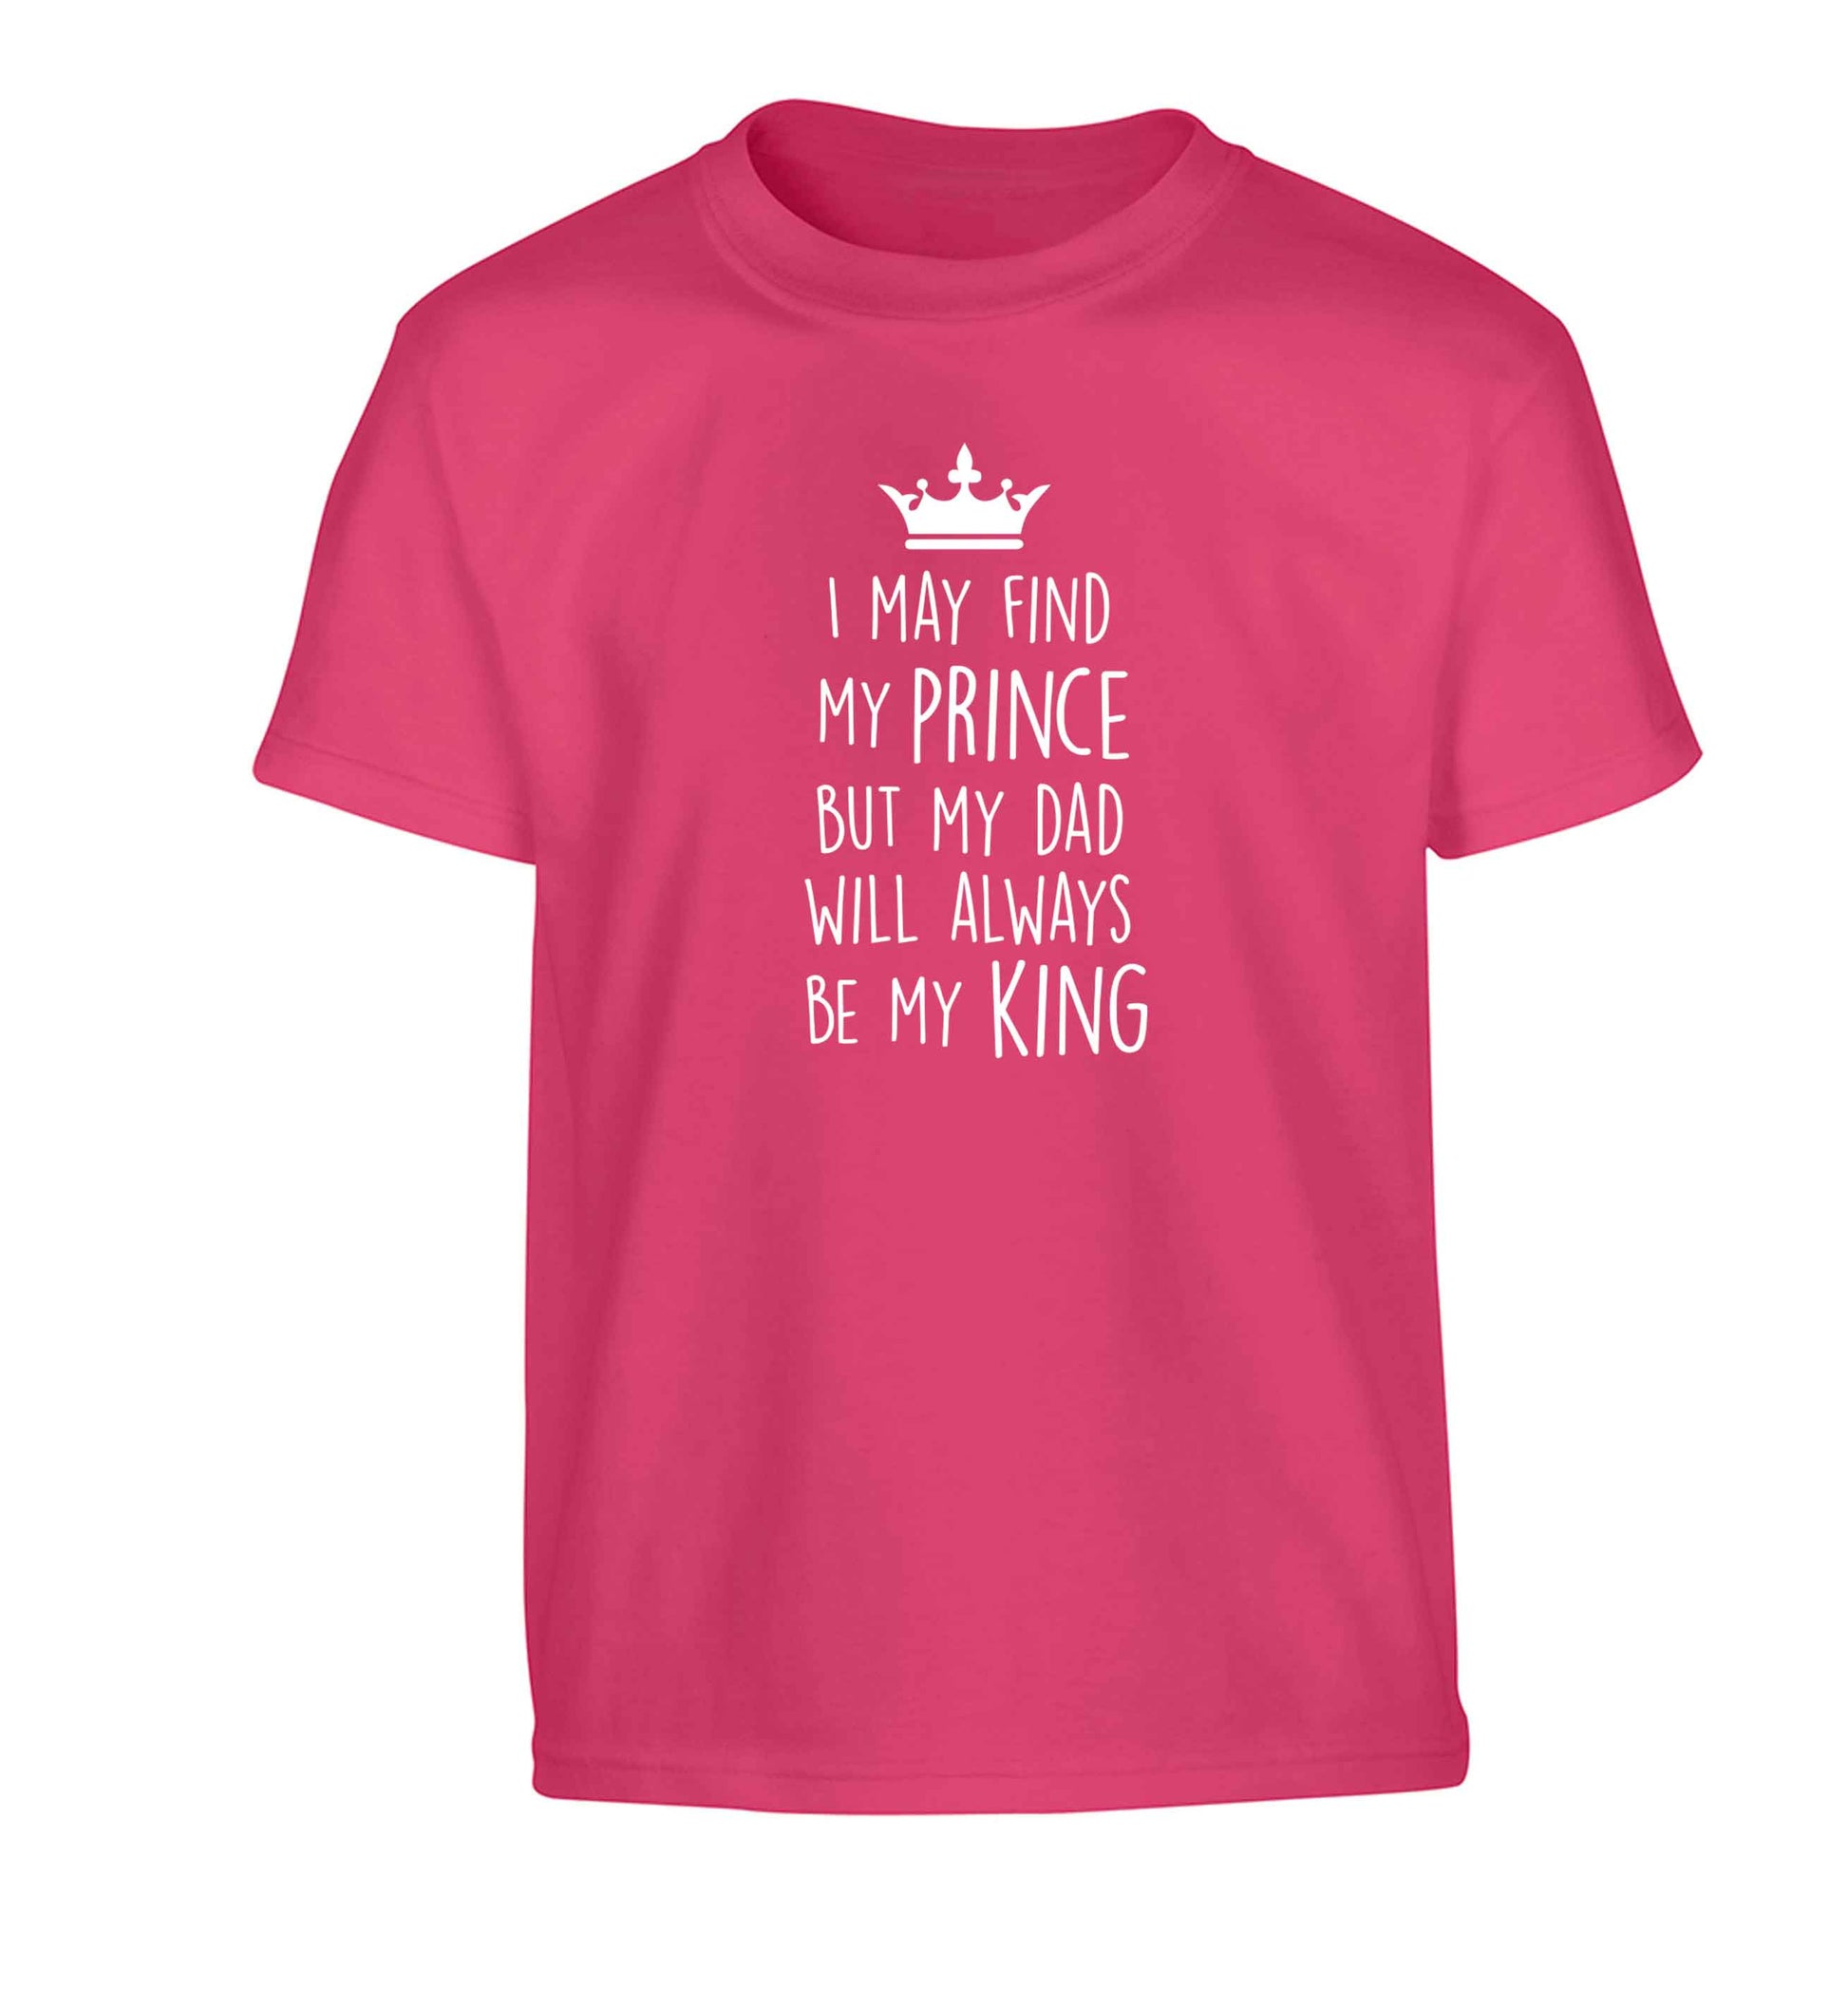 I may find my prince but my dad will always be my king Children's pink Tshirt 12-13 Years